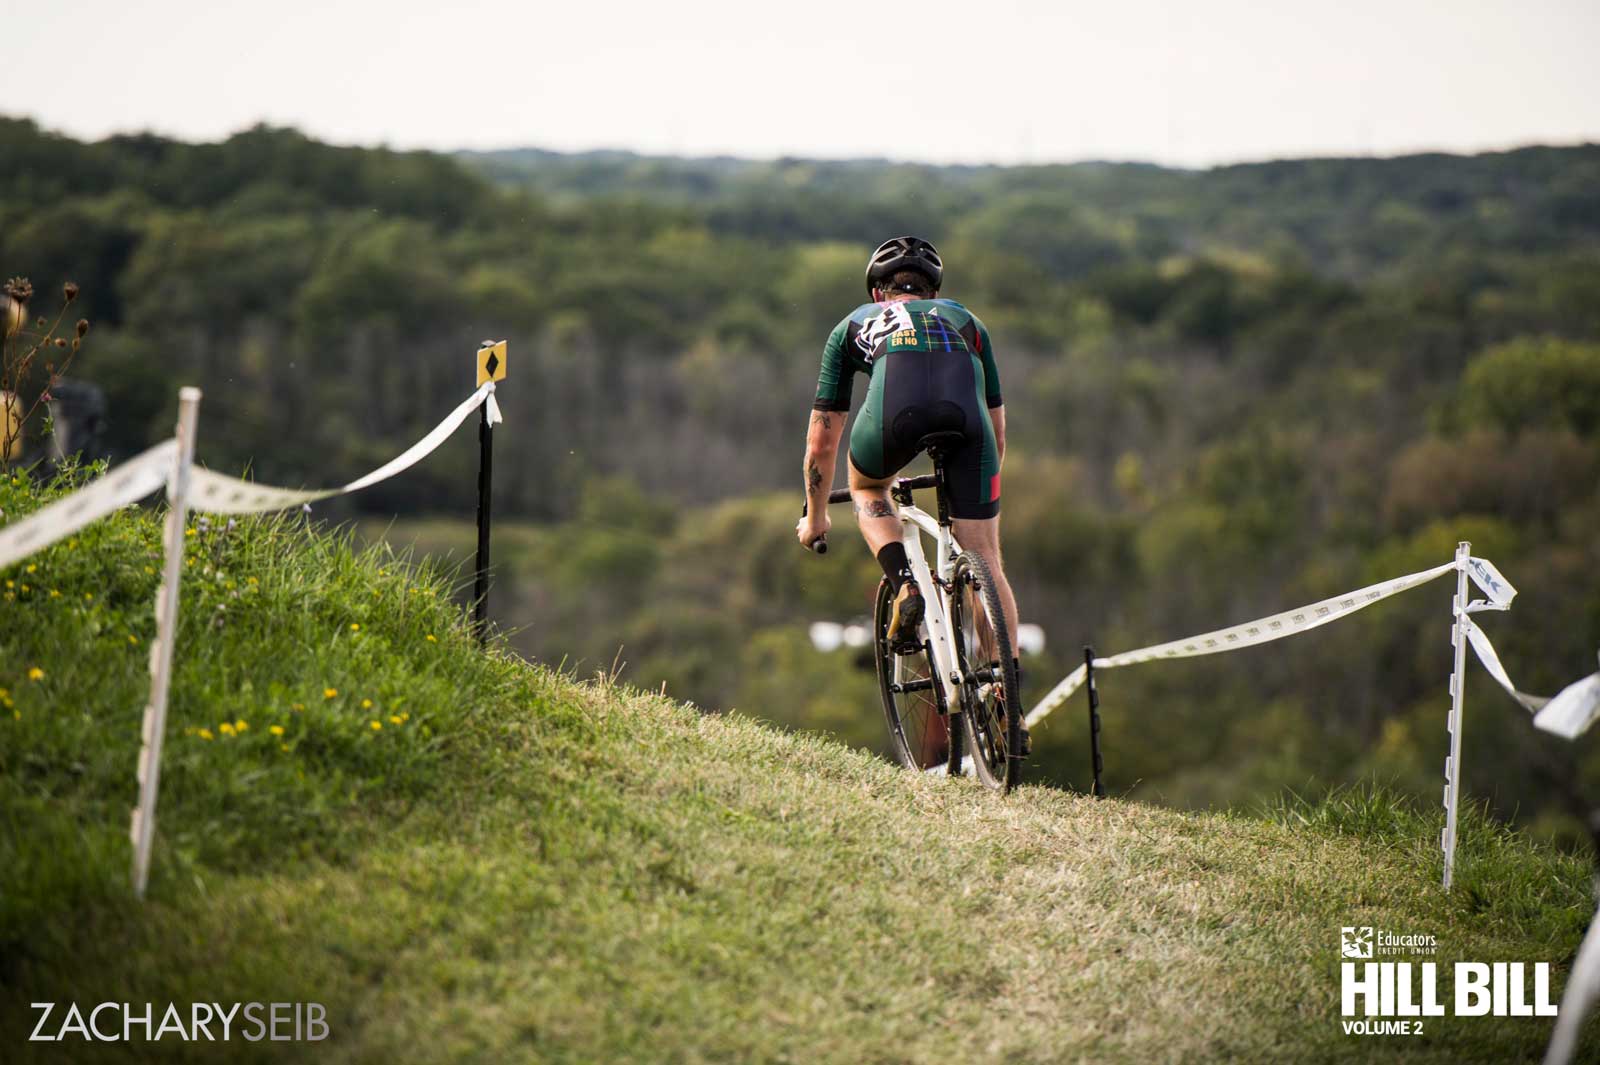 Behind a cyclocross racer about to drop down a descent overlooking a beautiful wooded area.